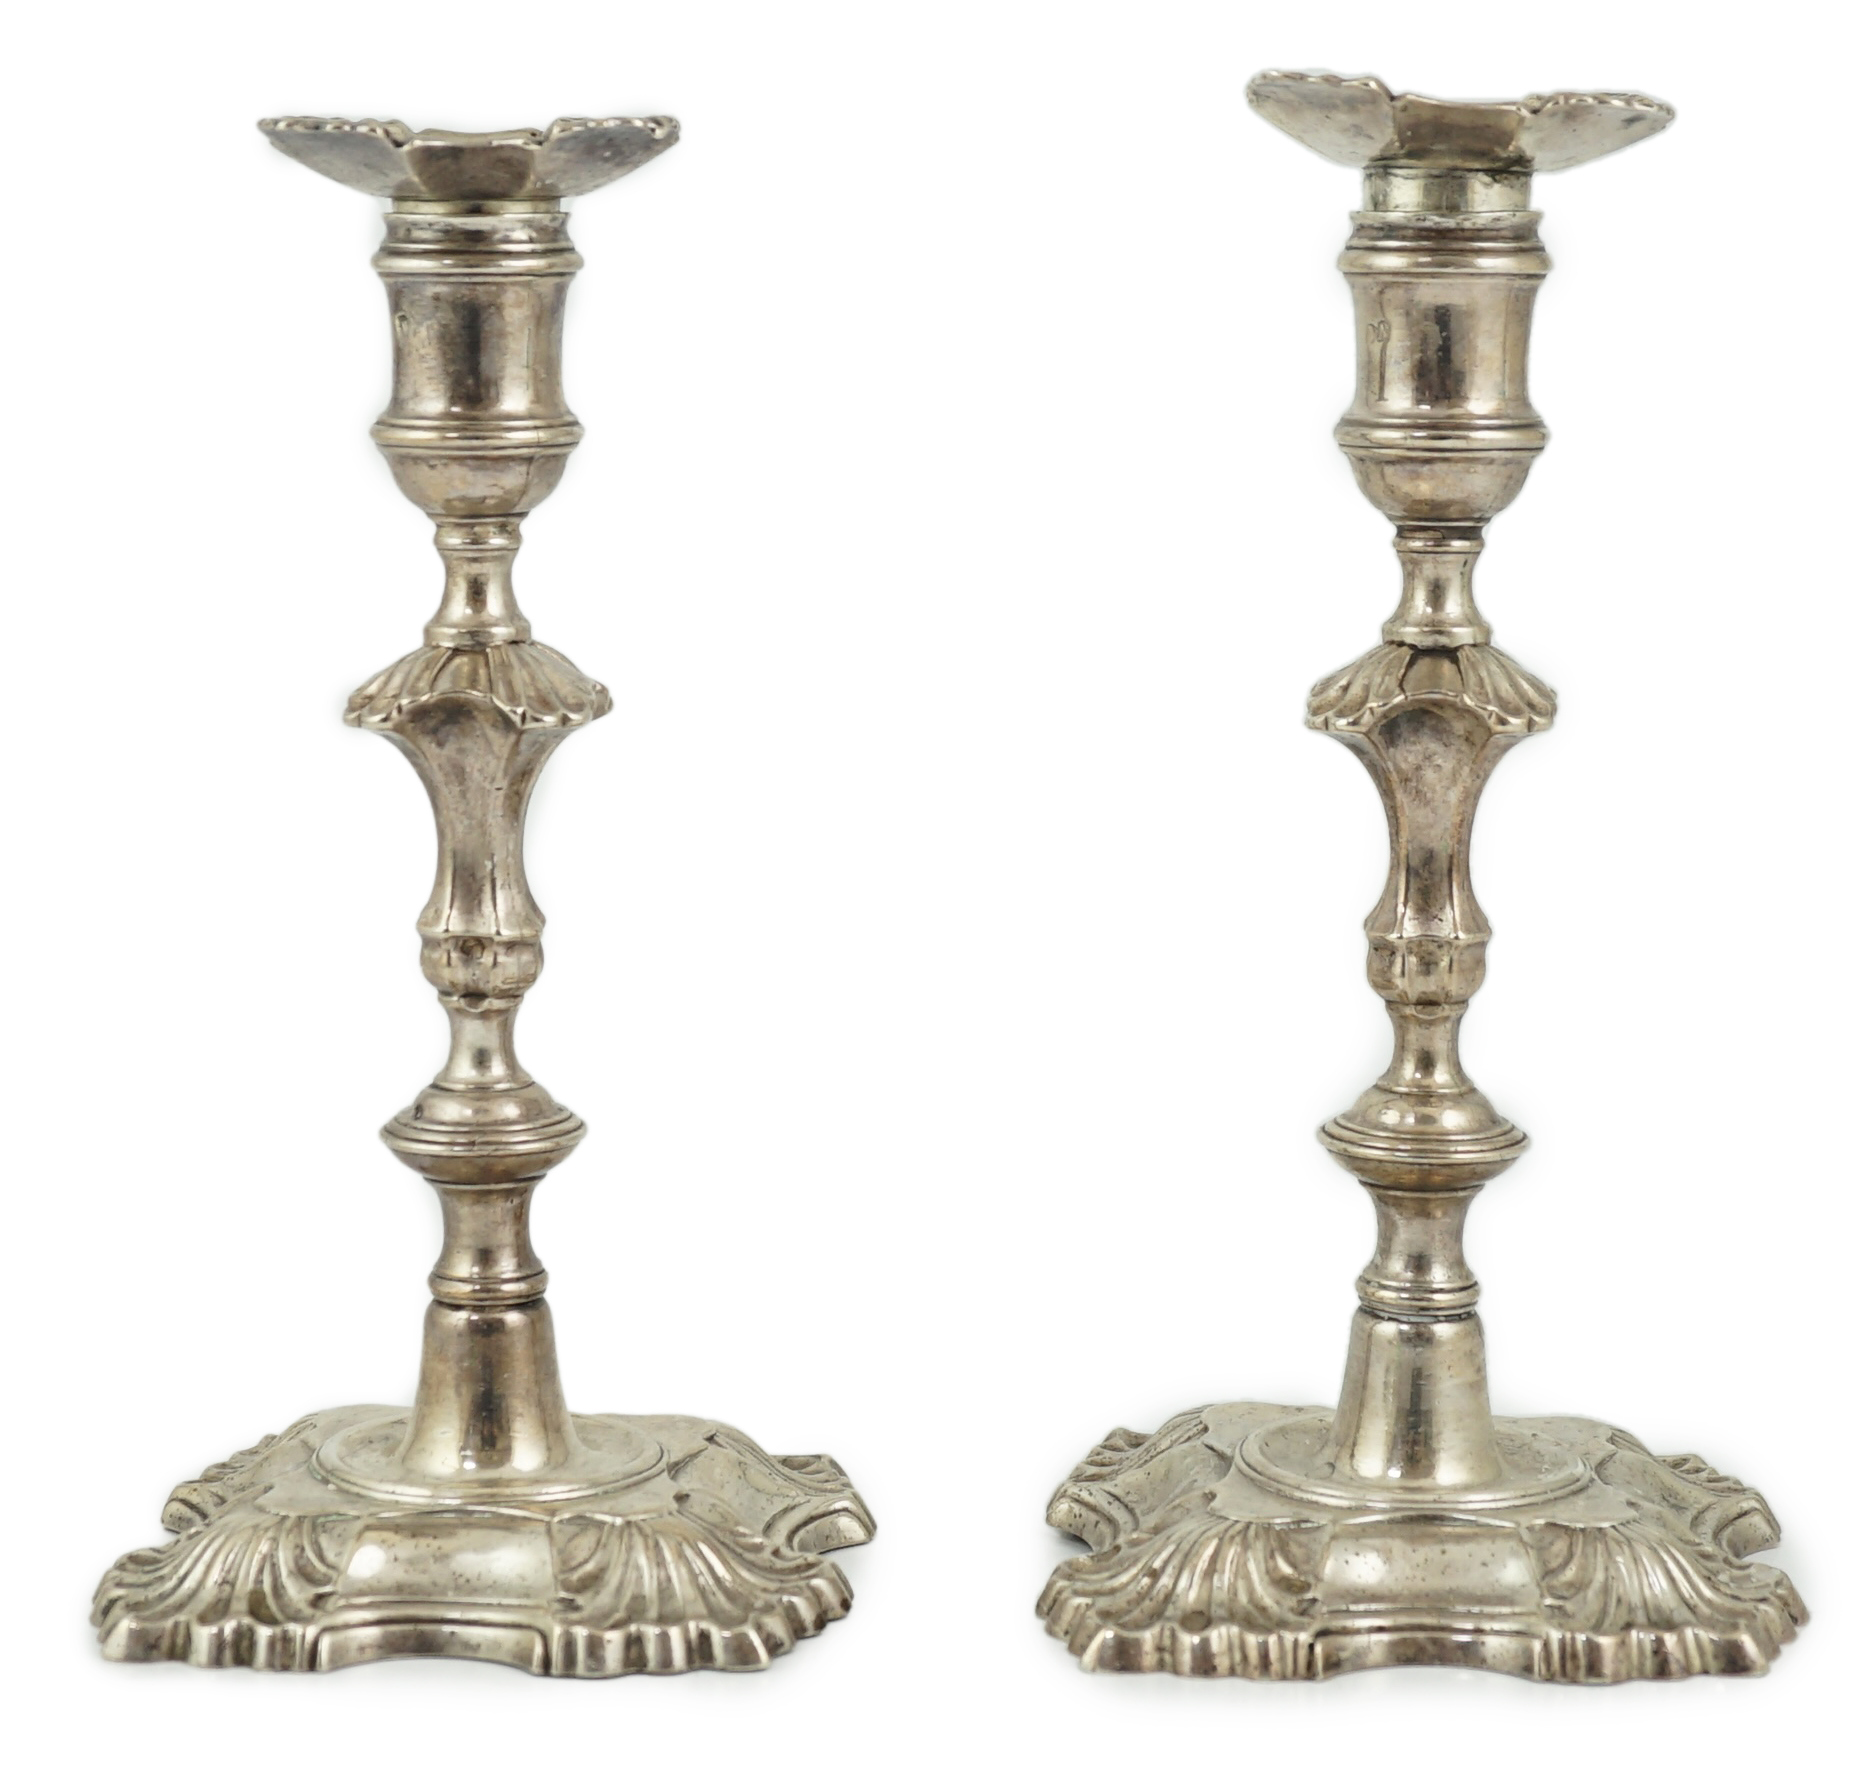 A pair of George II cast silver candlesticks by William Gould